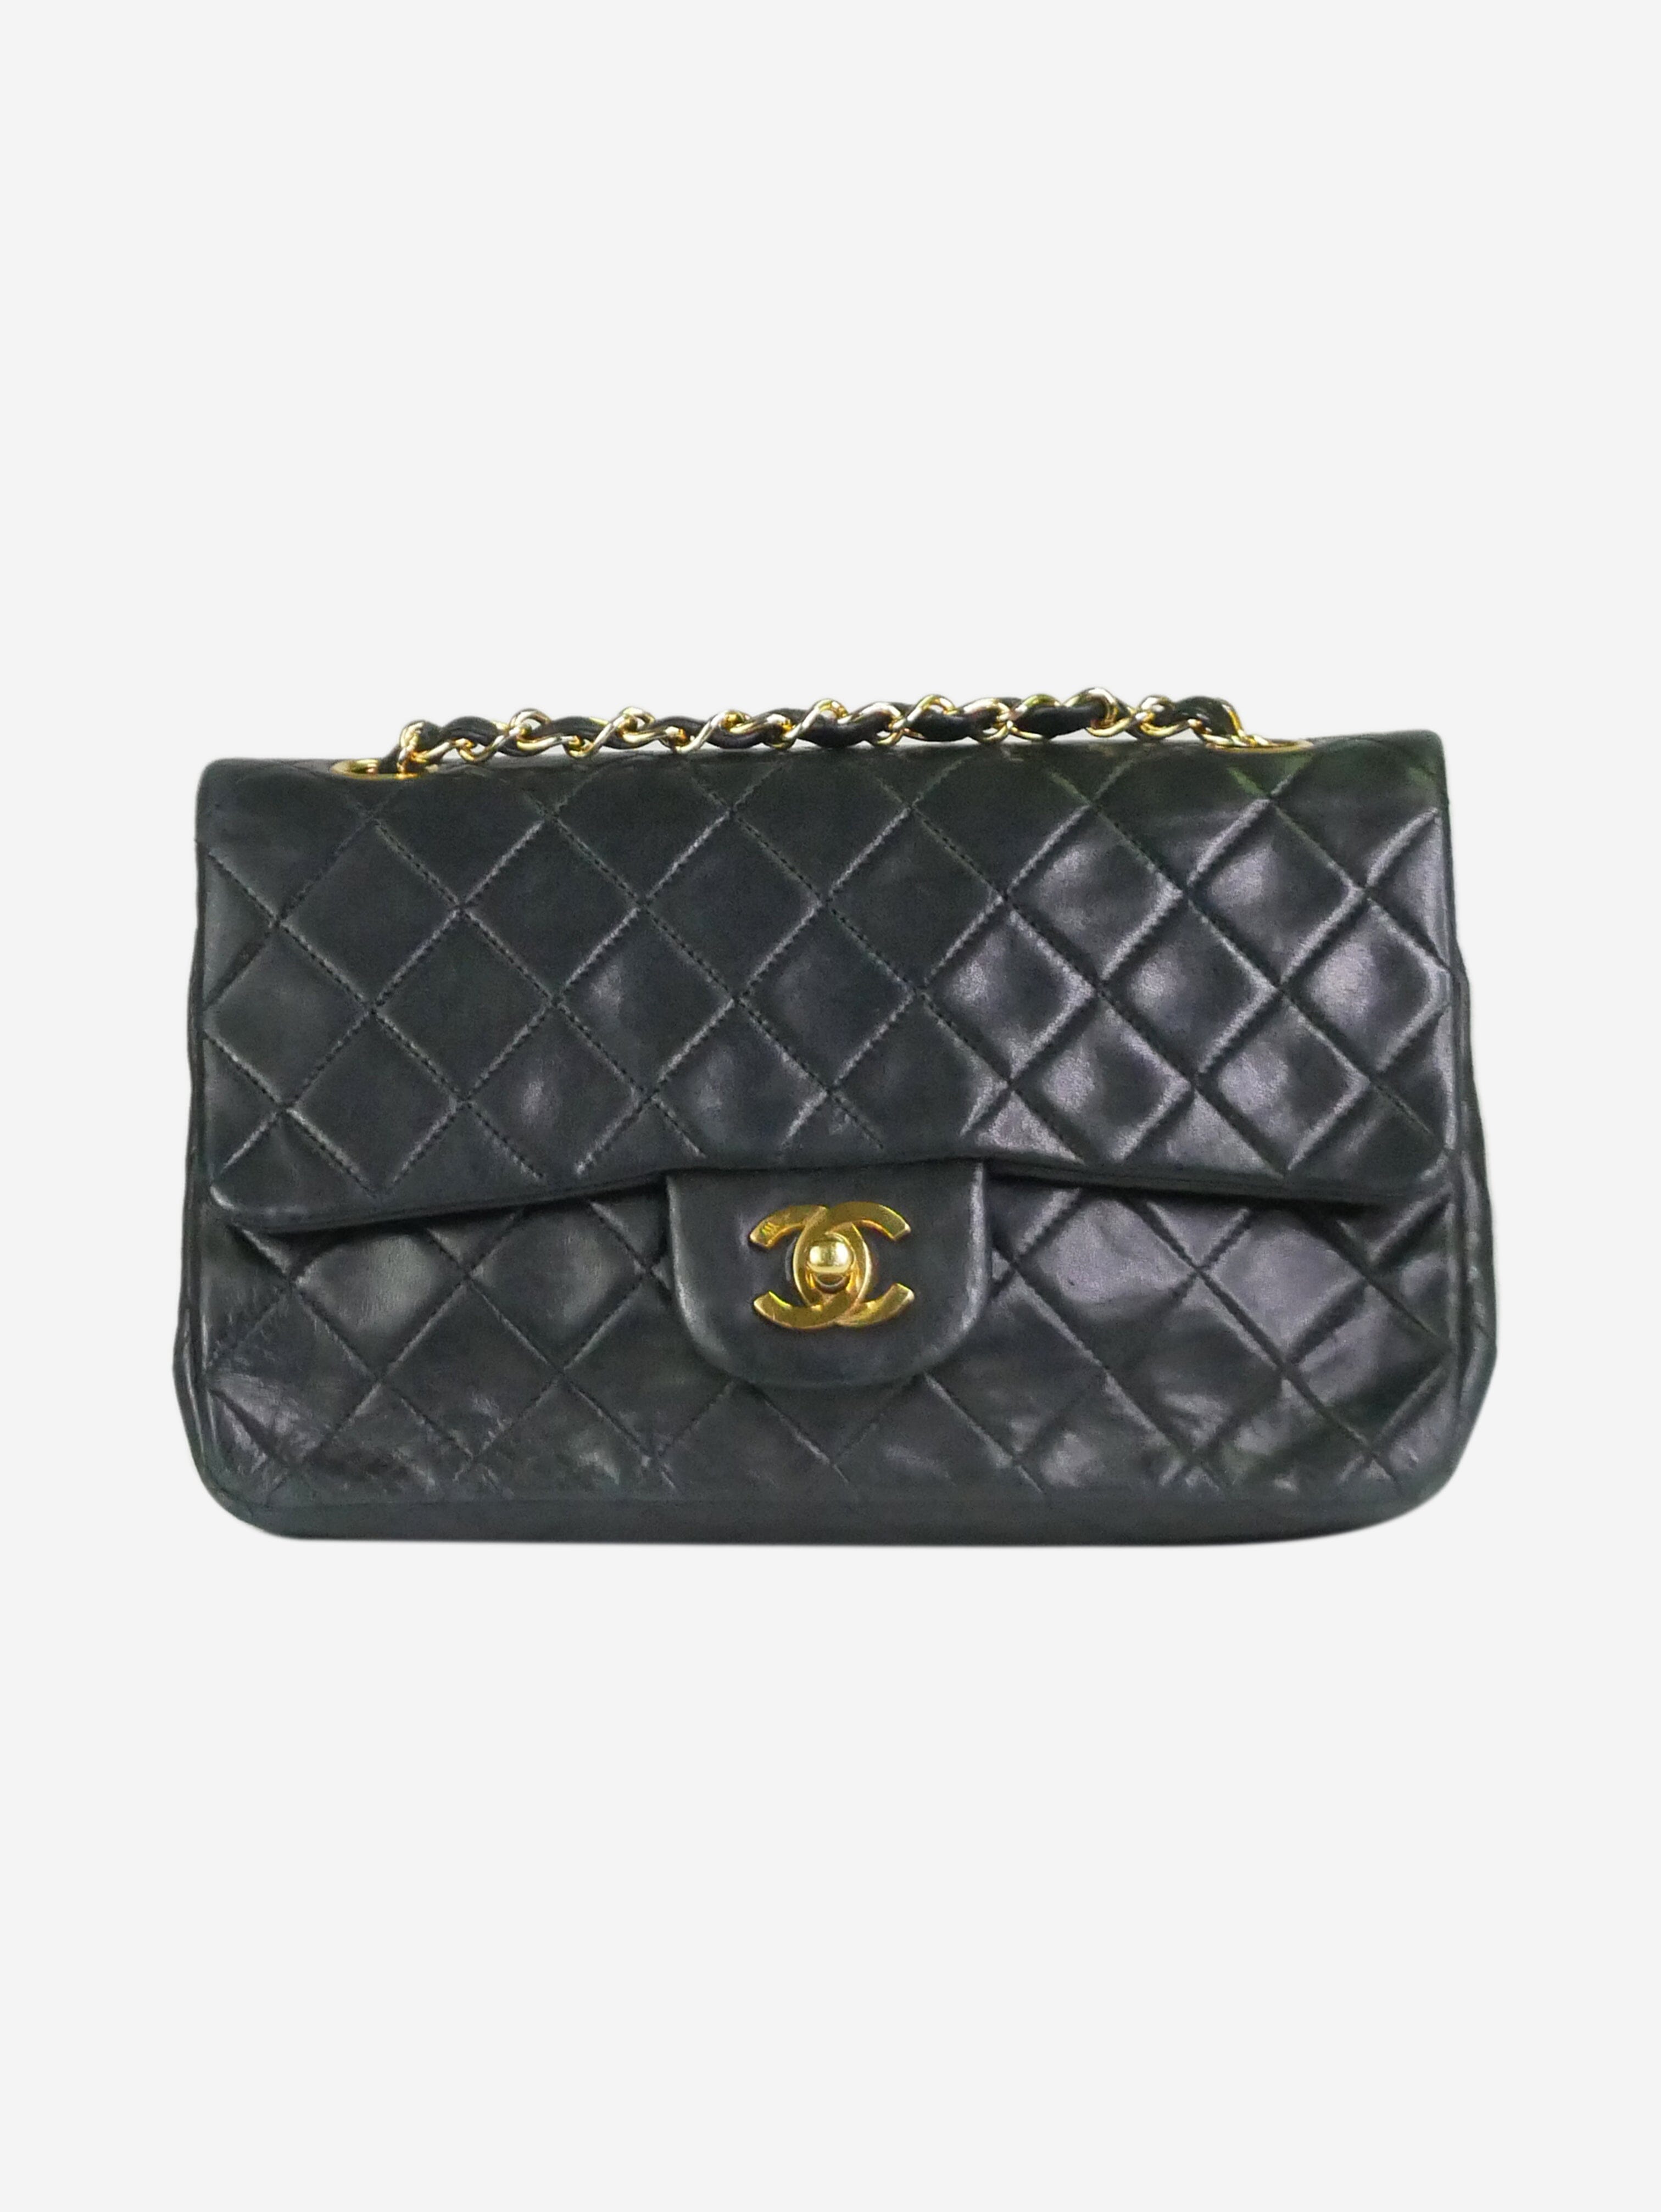 Black pre-owned Chanel quilted shoulder bag with pearl detail